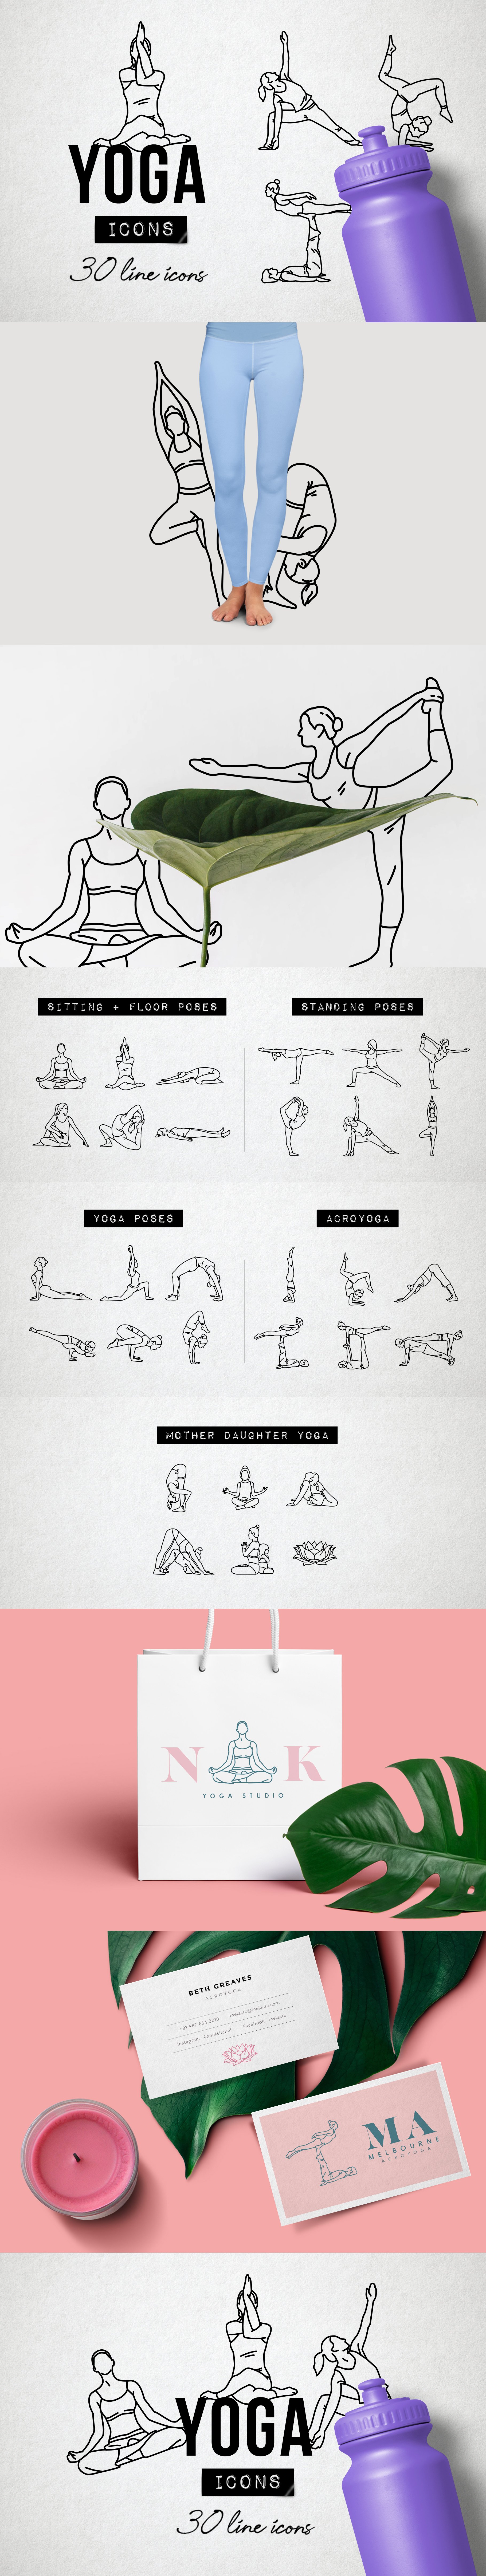 Fitness and Yoga Icons Pack cover image.